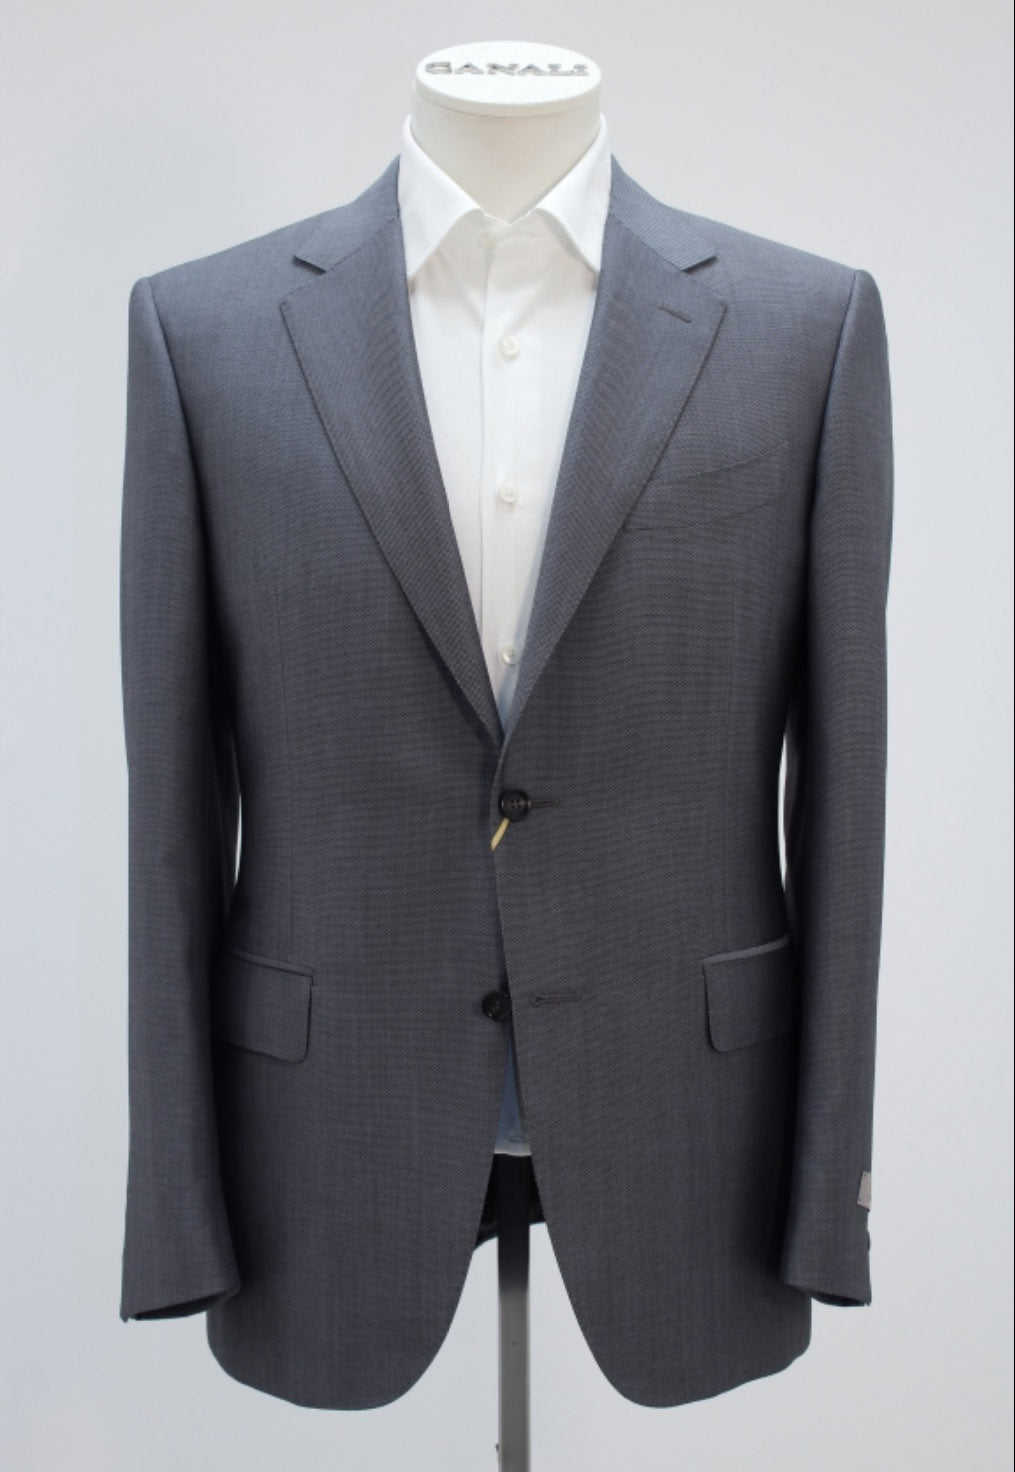 CANALI - Mid Grey Wool And Mohair Birdseye Fabric Suit 19220/93-AM00987-201